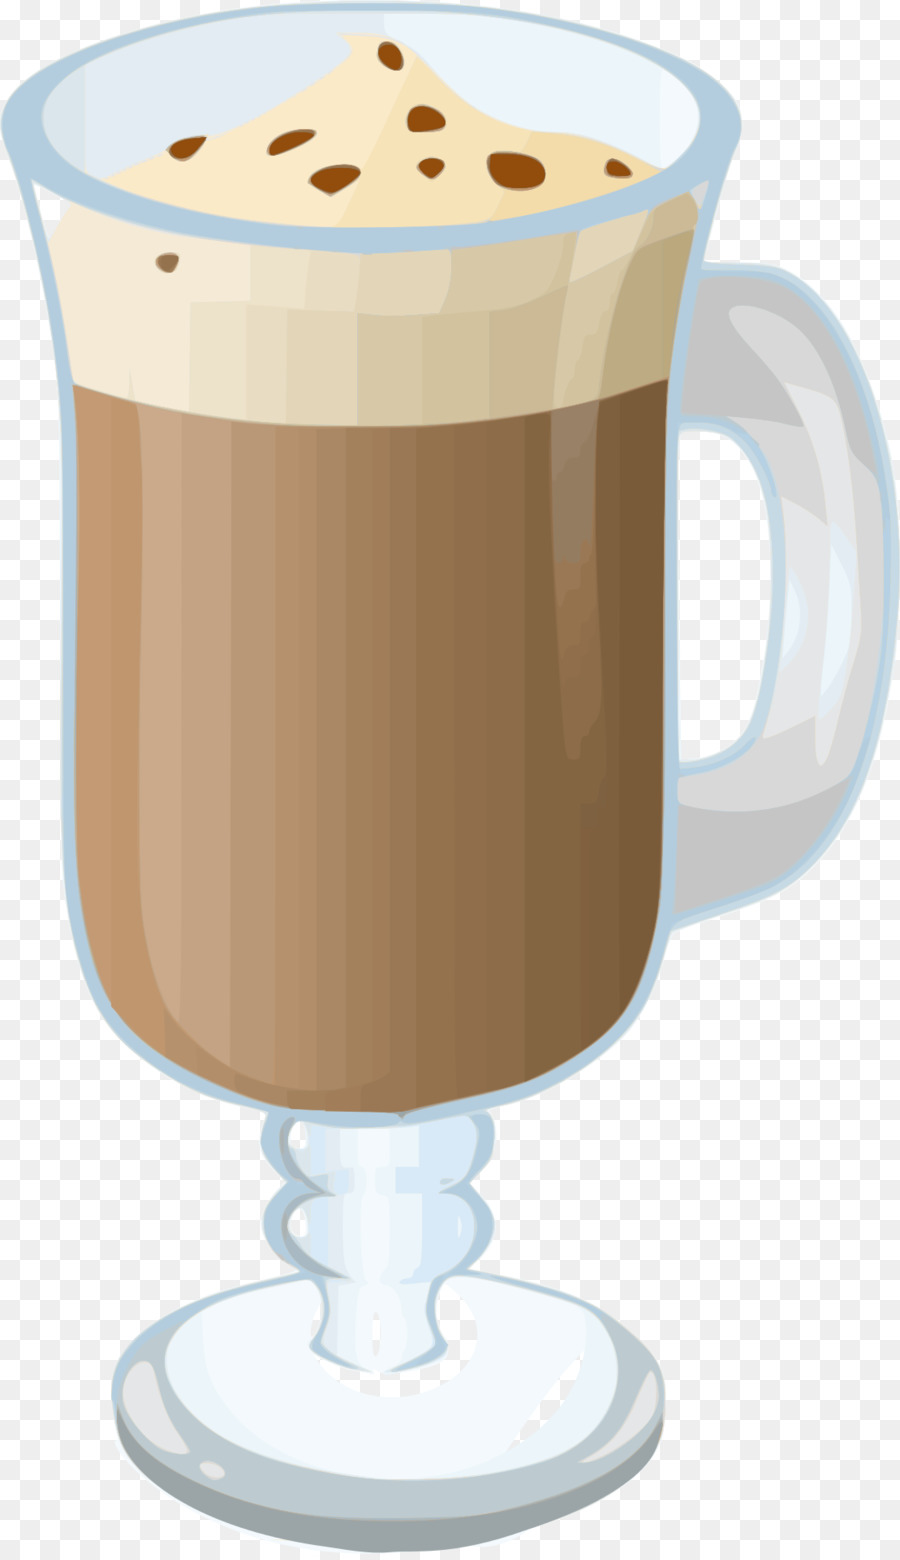 Coffee Hot chocolate Clip art - Snow top coffee and transparent cup png download - 1109*1920 - Free Transparent Coffee png Download.